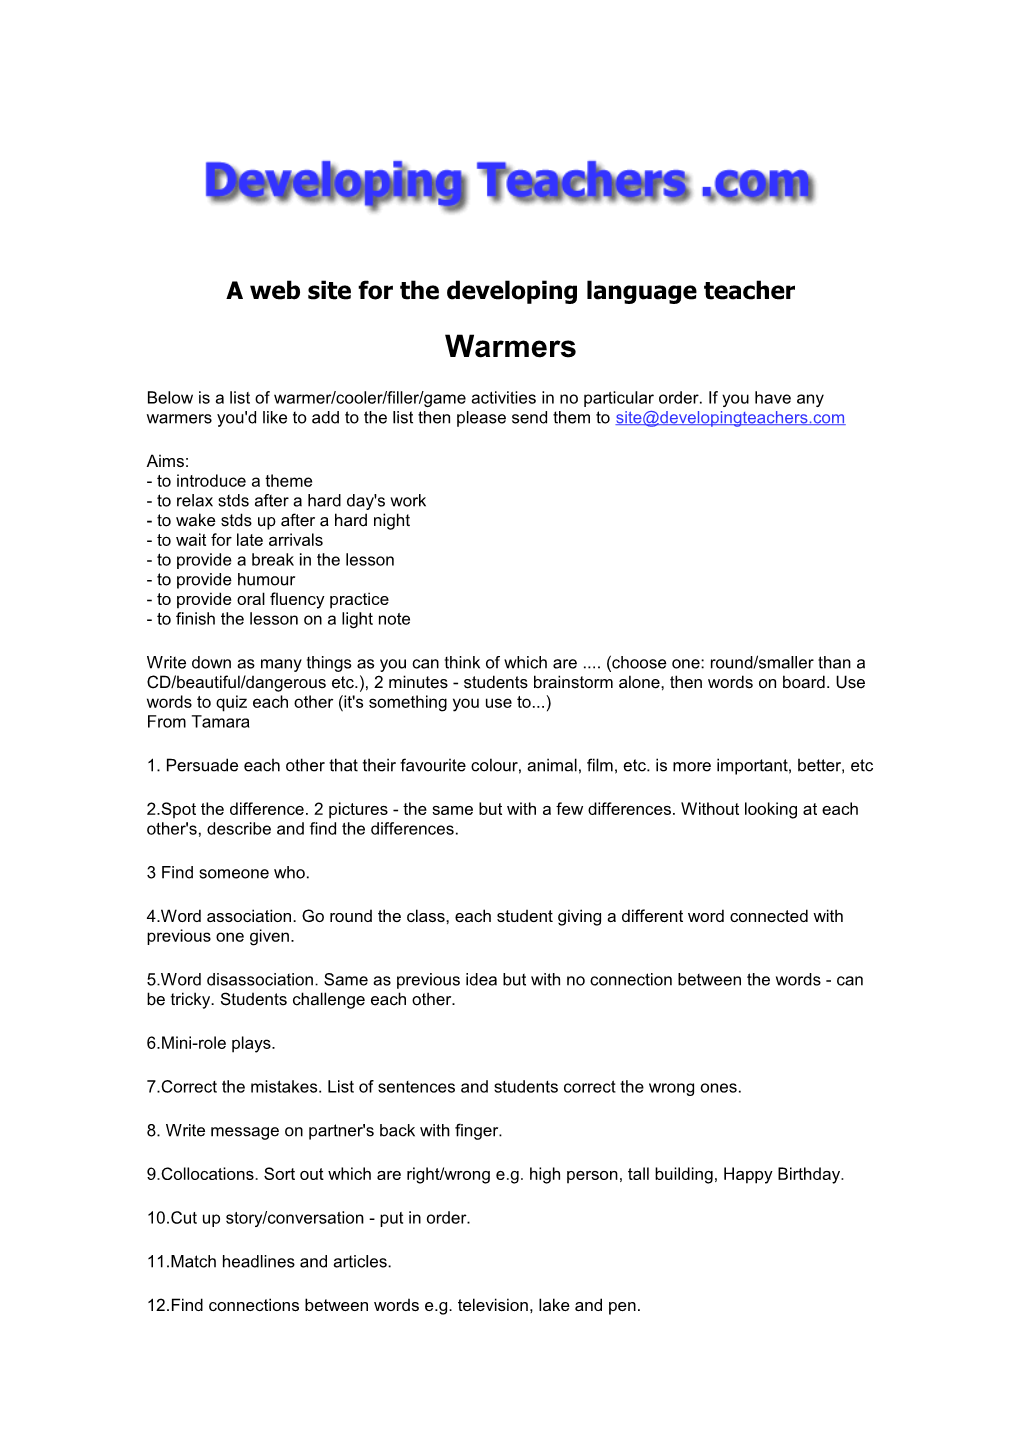 A Web Site for the Developing Language Teacher